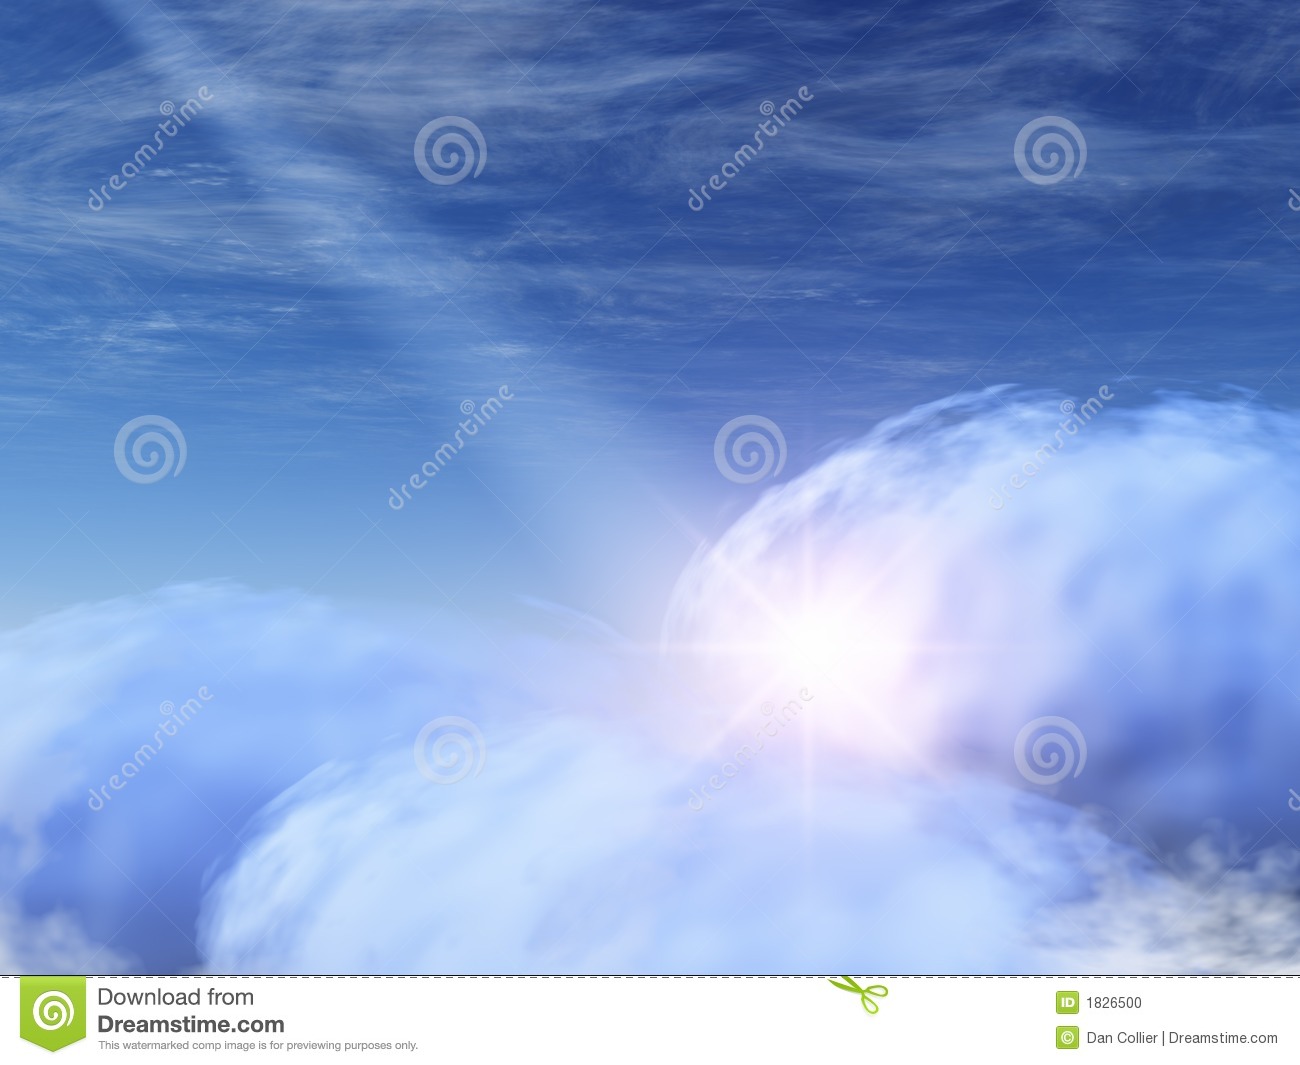 God Rays And Star In Heavenly Clouds Stock Photo   Image  1826500